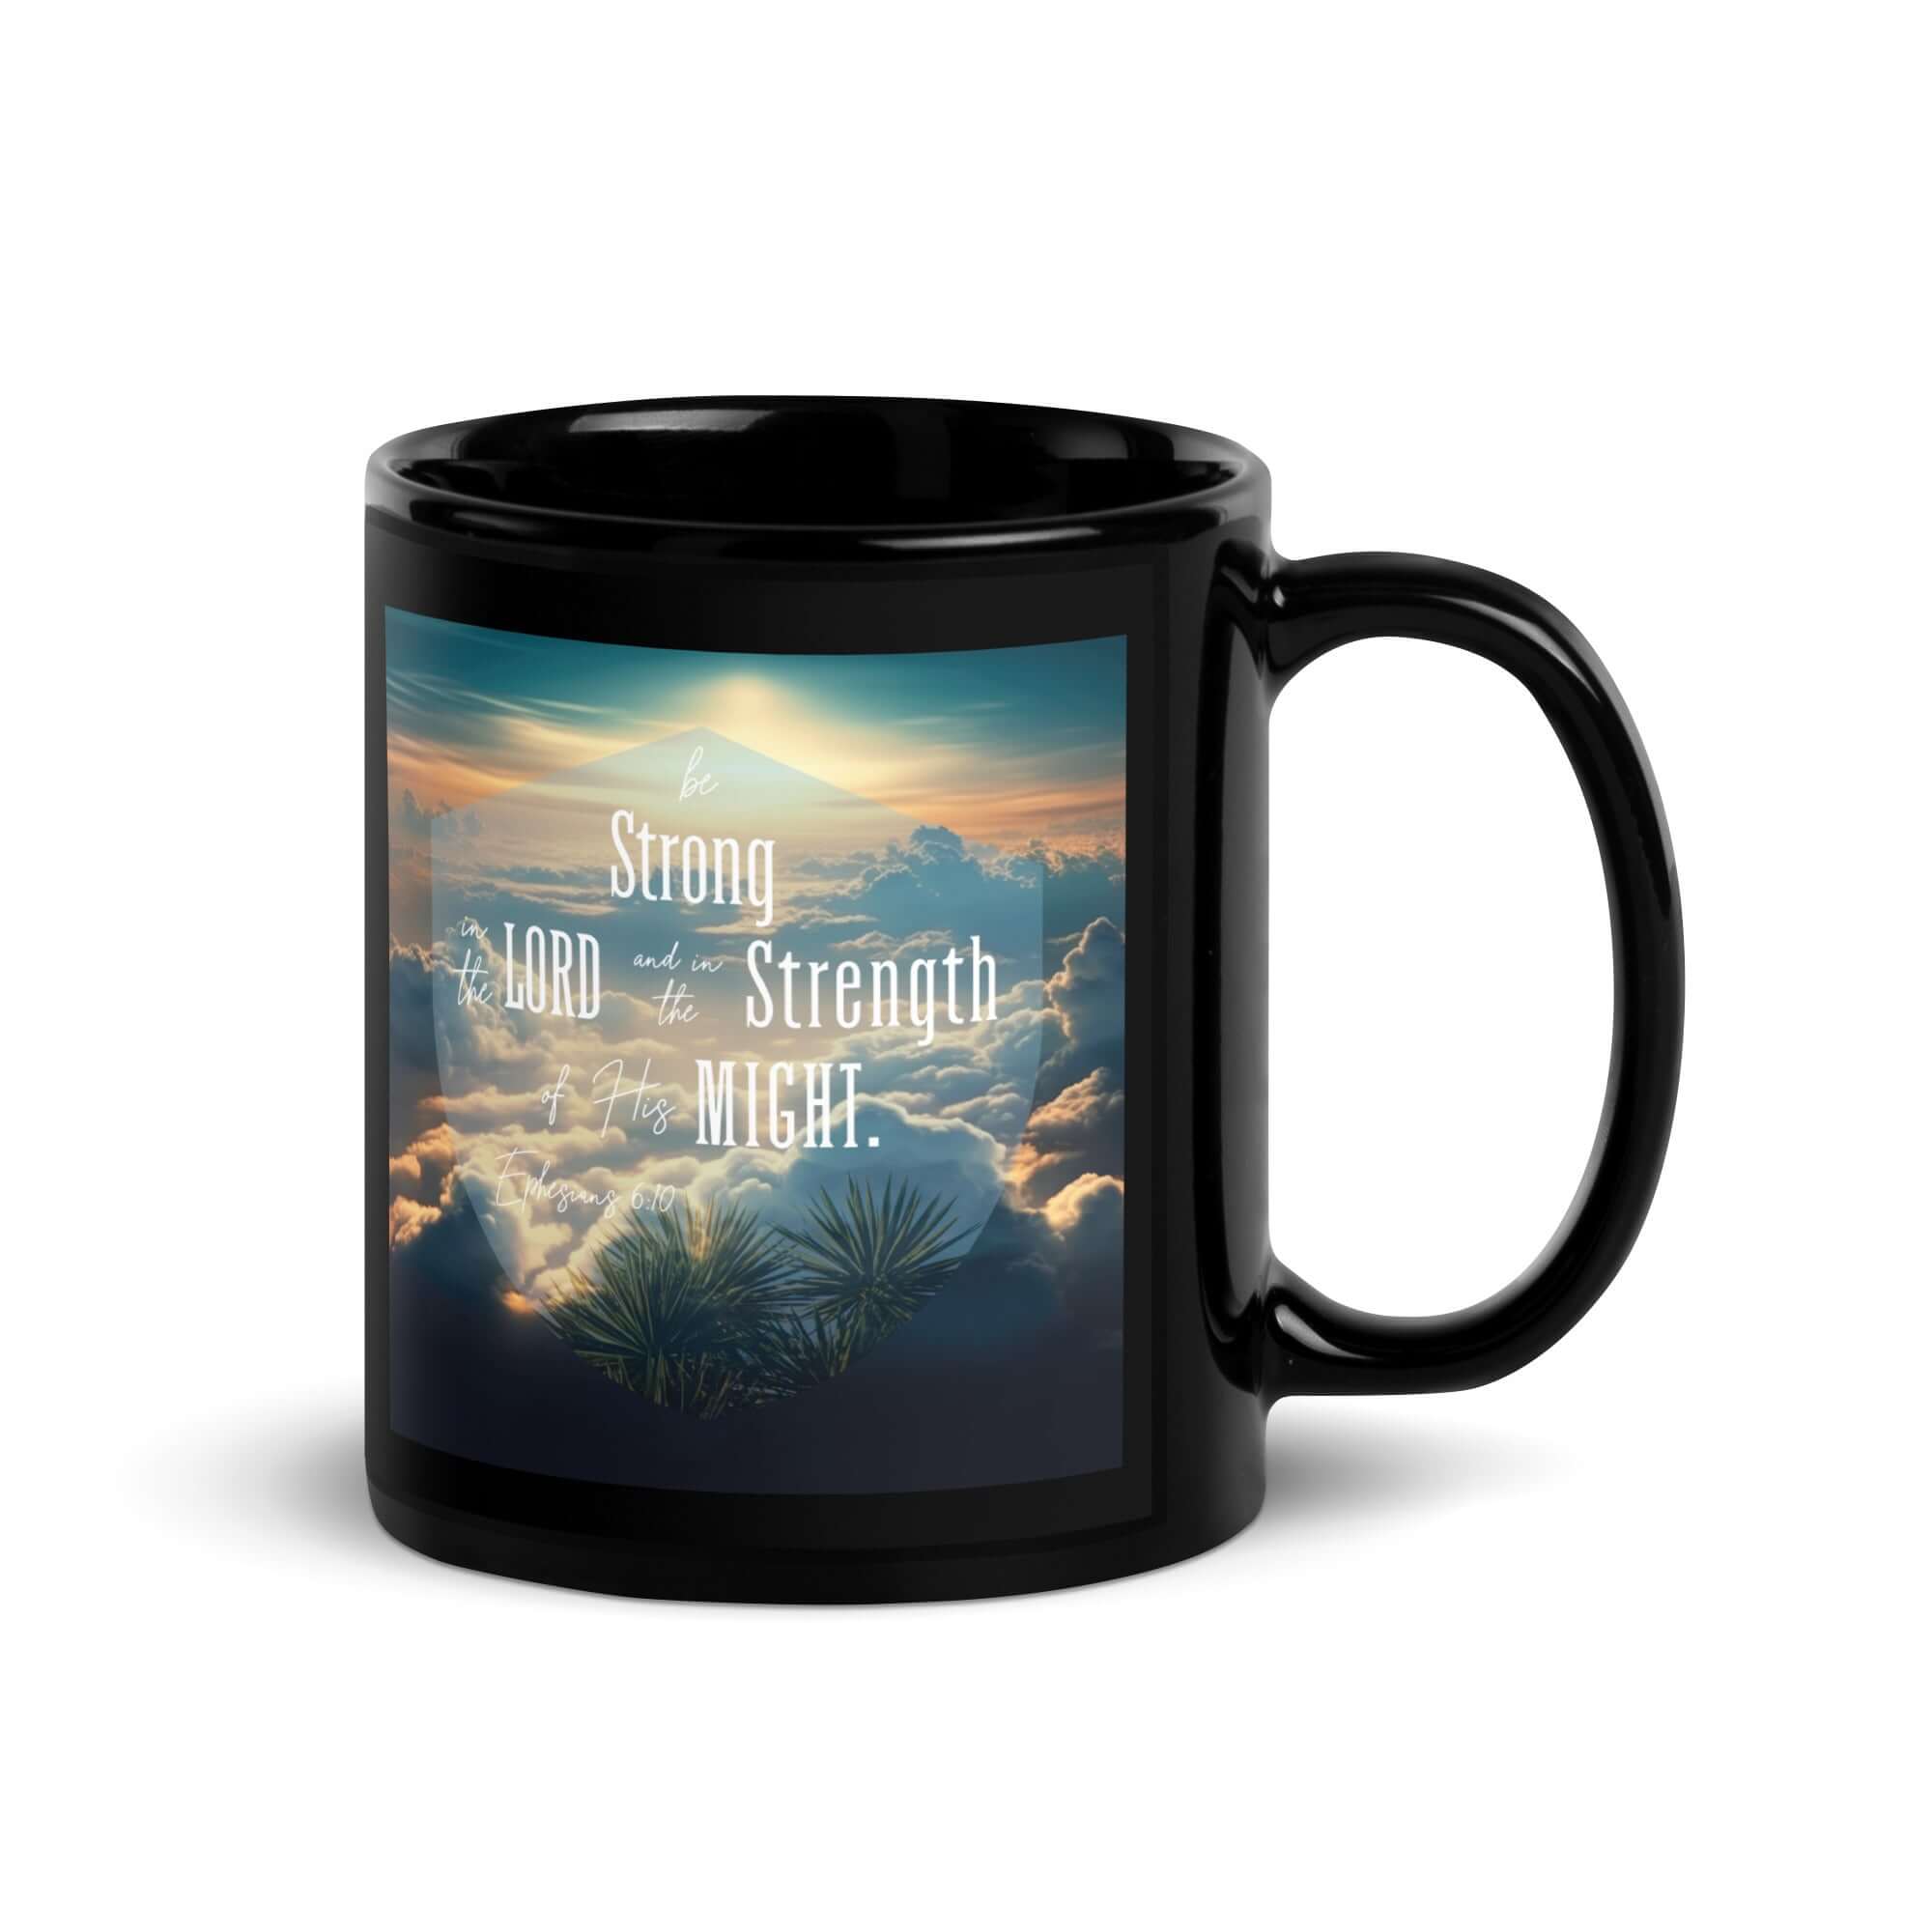 Eph. 6:10 - be strong in the Lord Black Mug